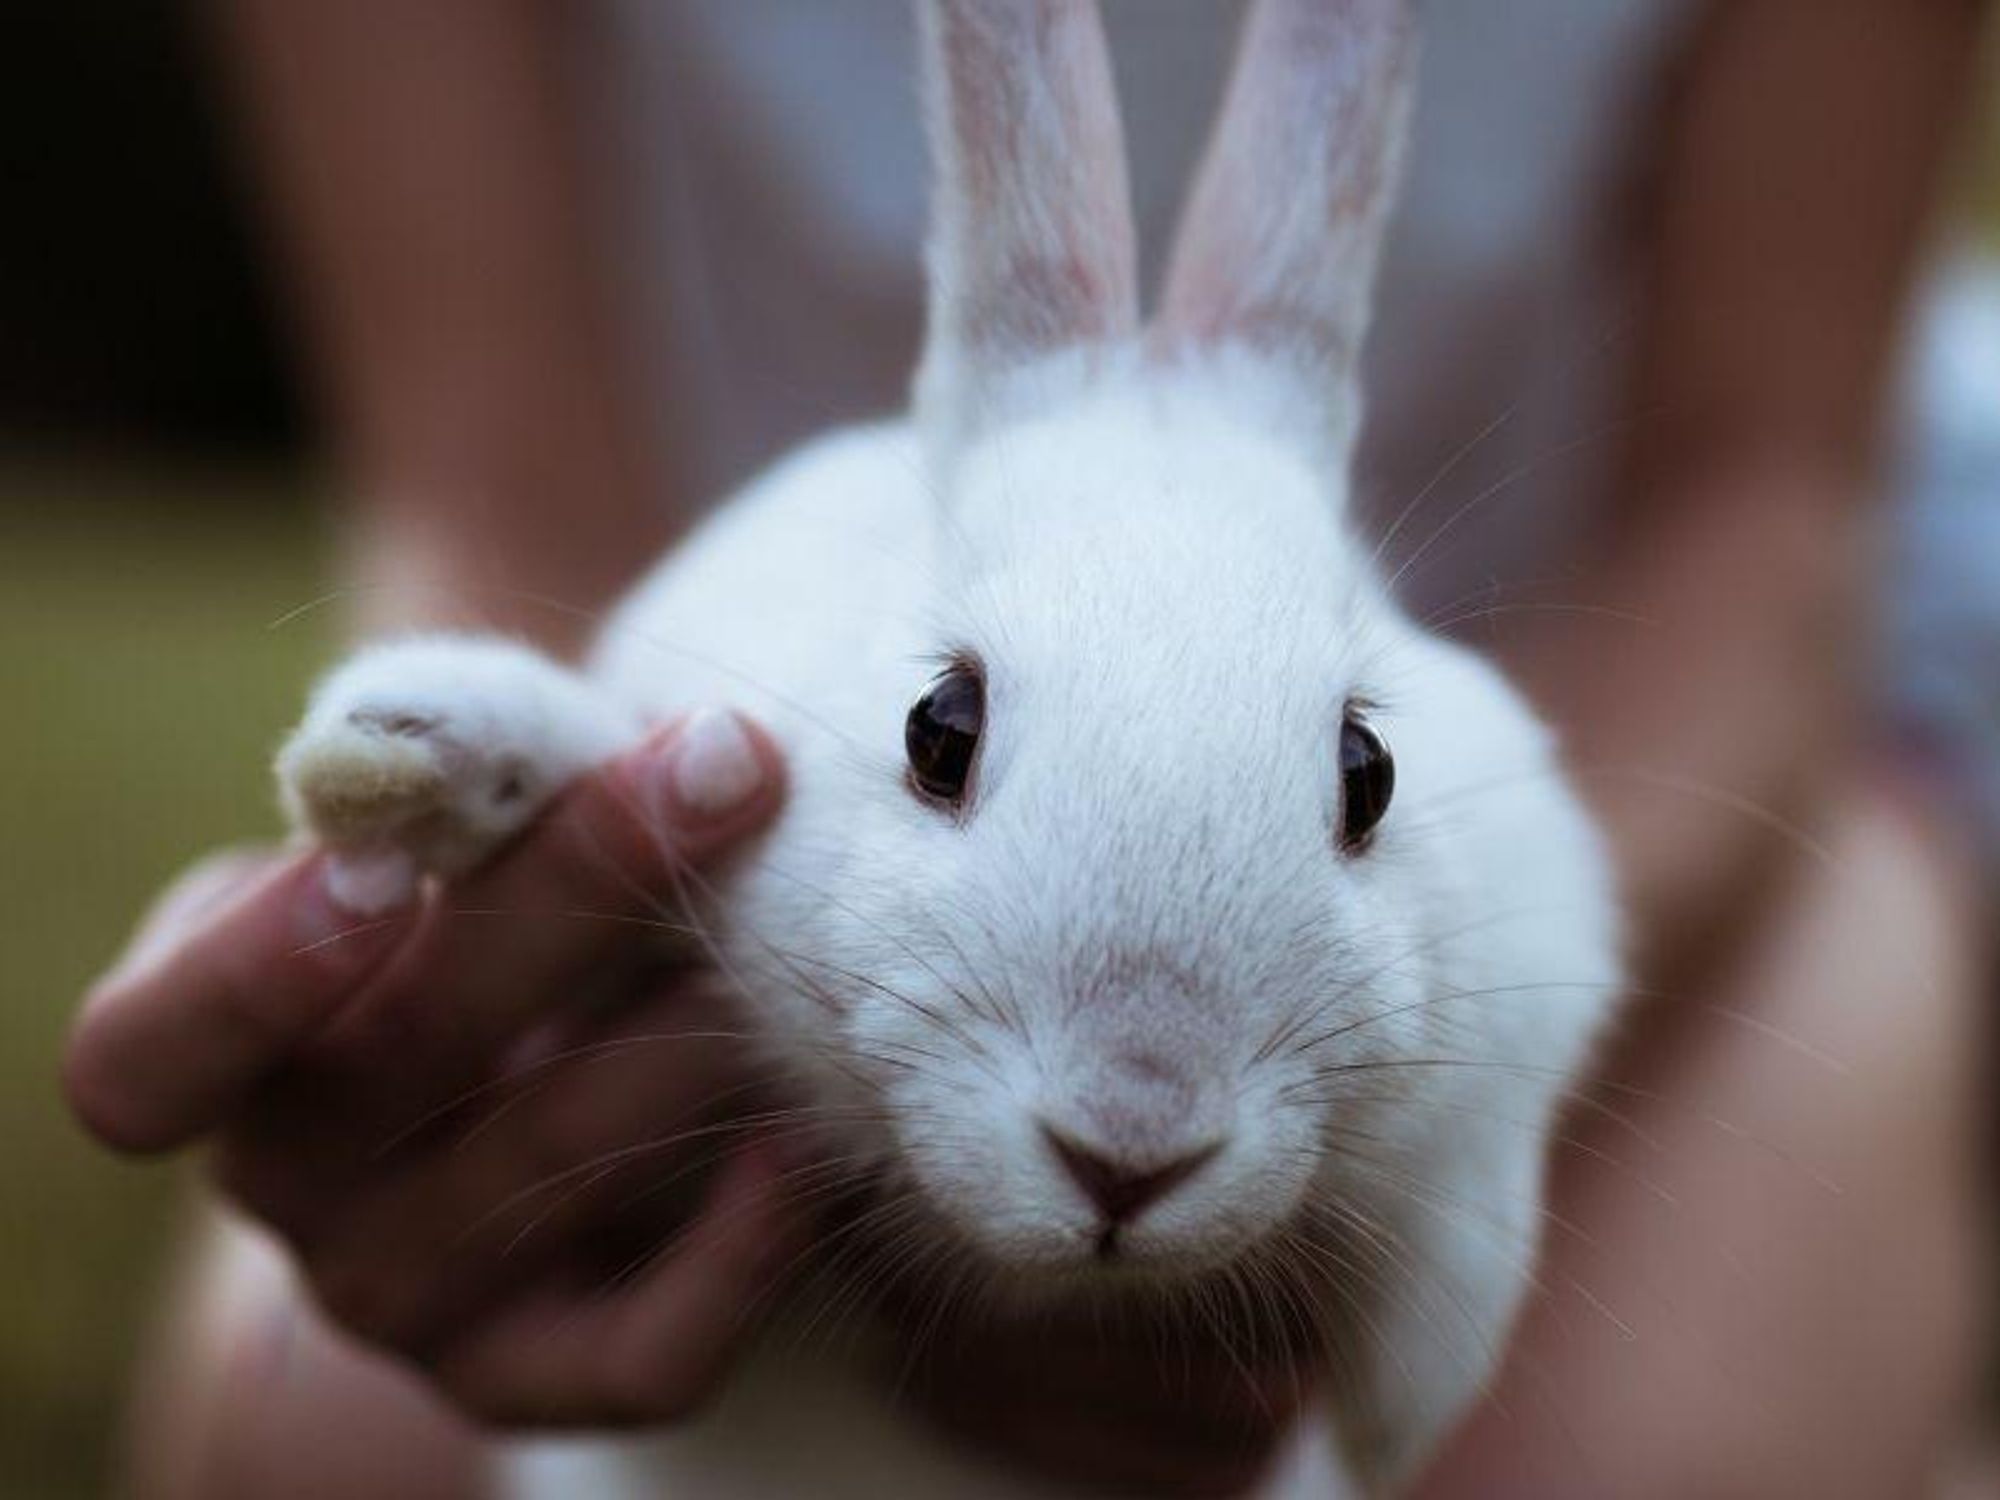 Bunnies make surprisingly awesome indoor pets - Upworthy